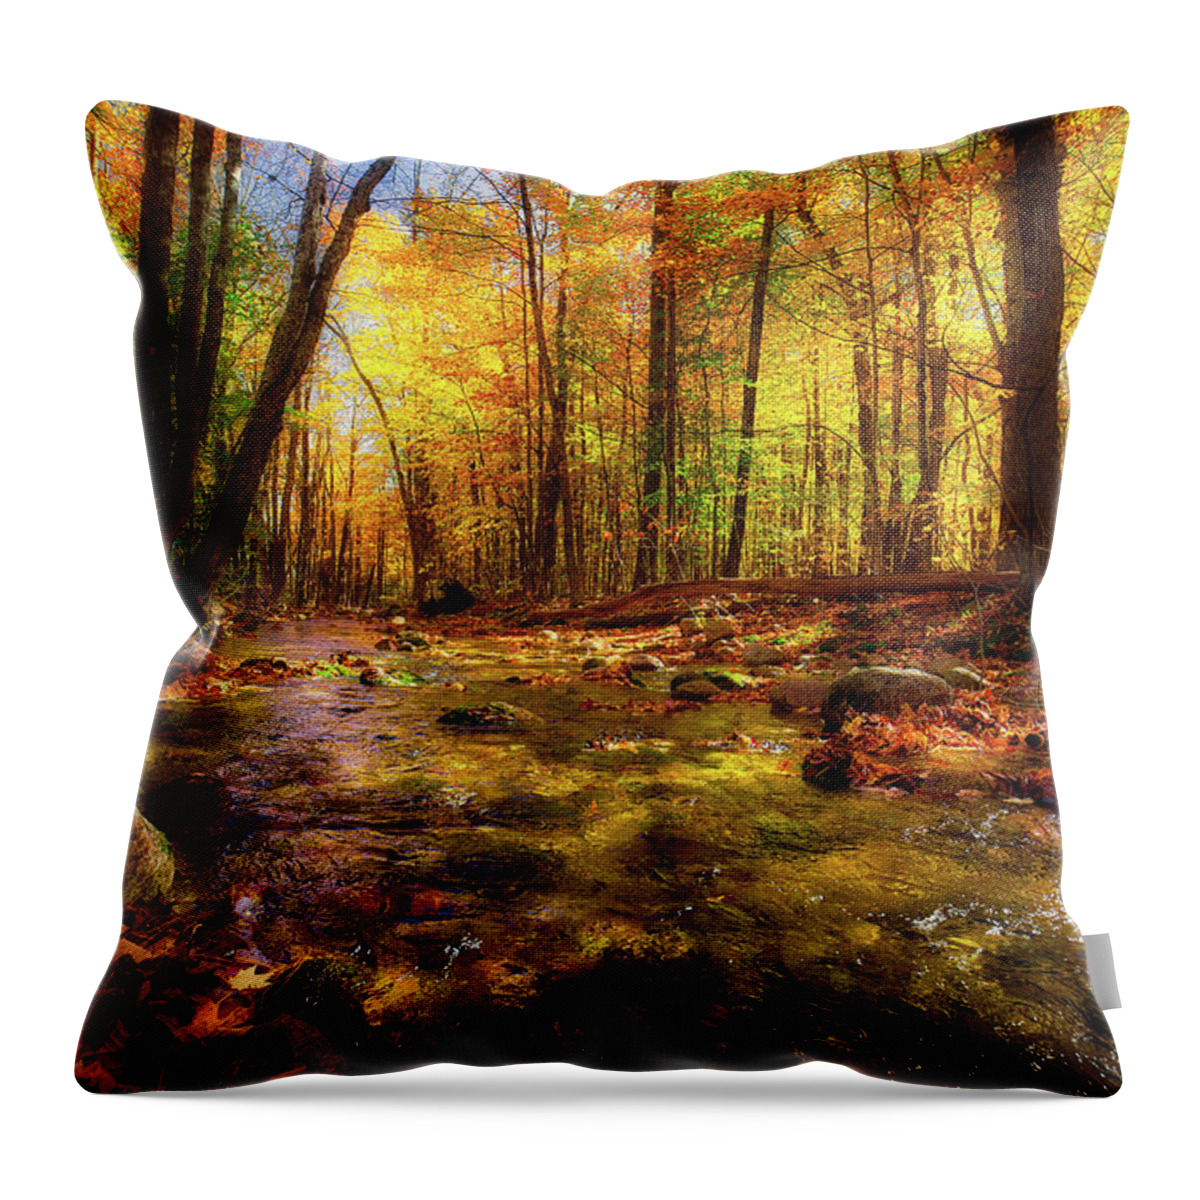 Fall Throw Pillow featuring the photograph Wonalancet River by Robert Clifford